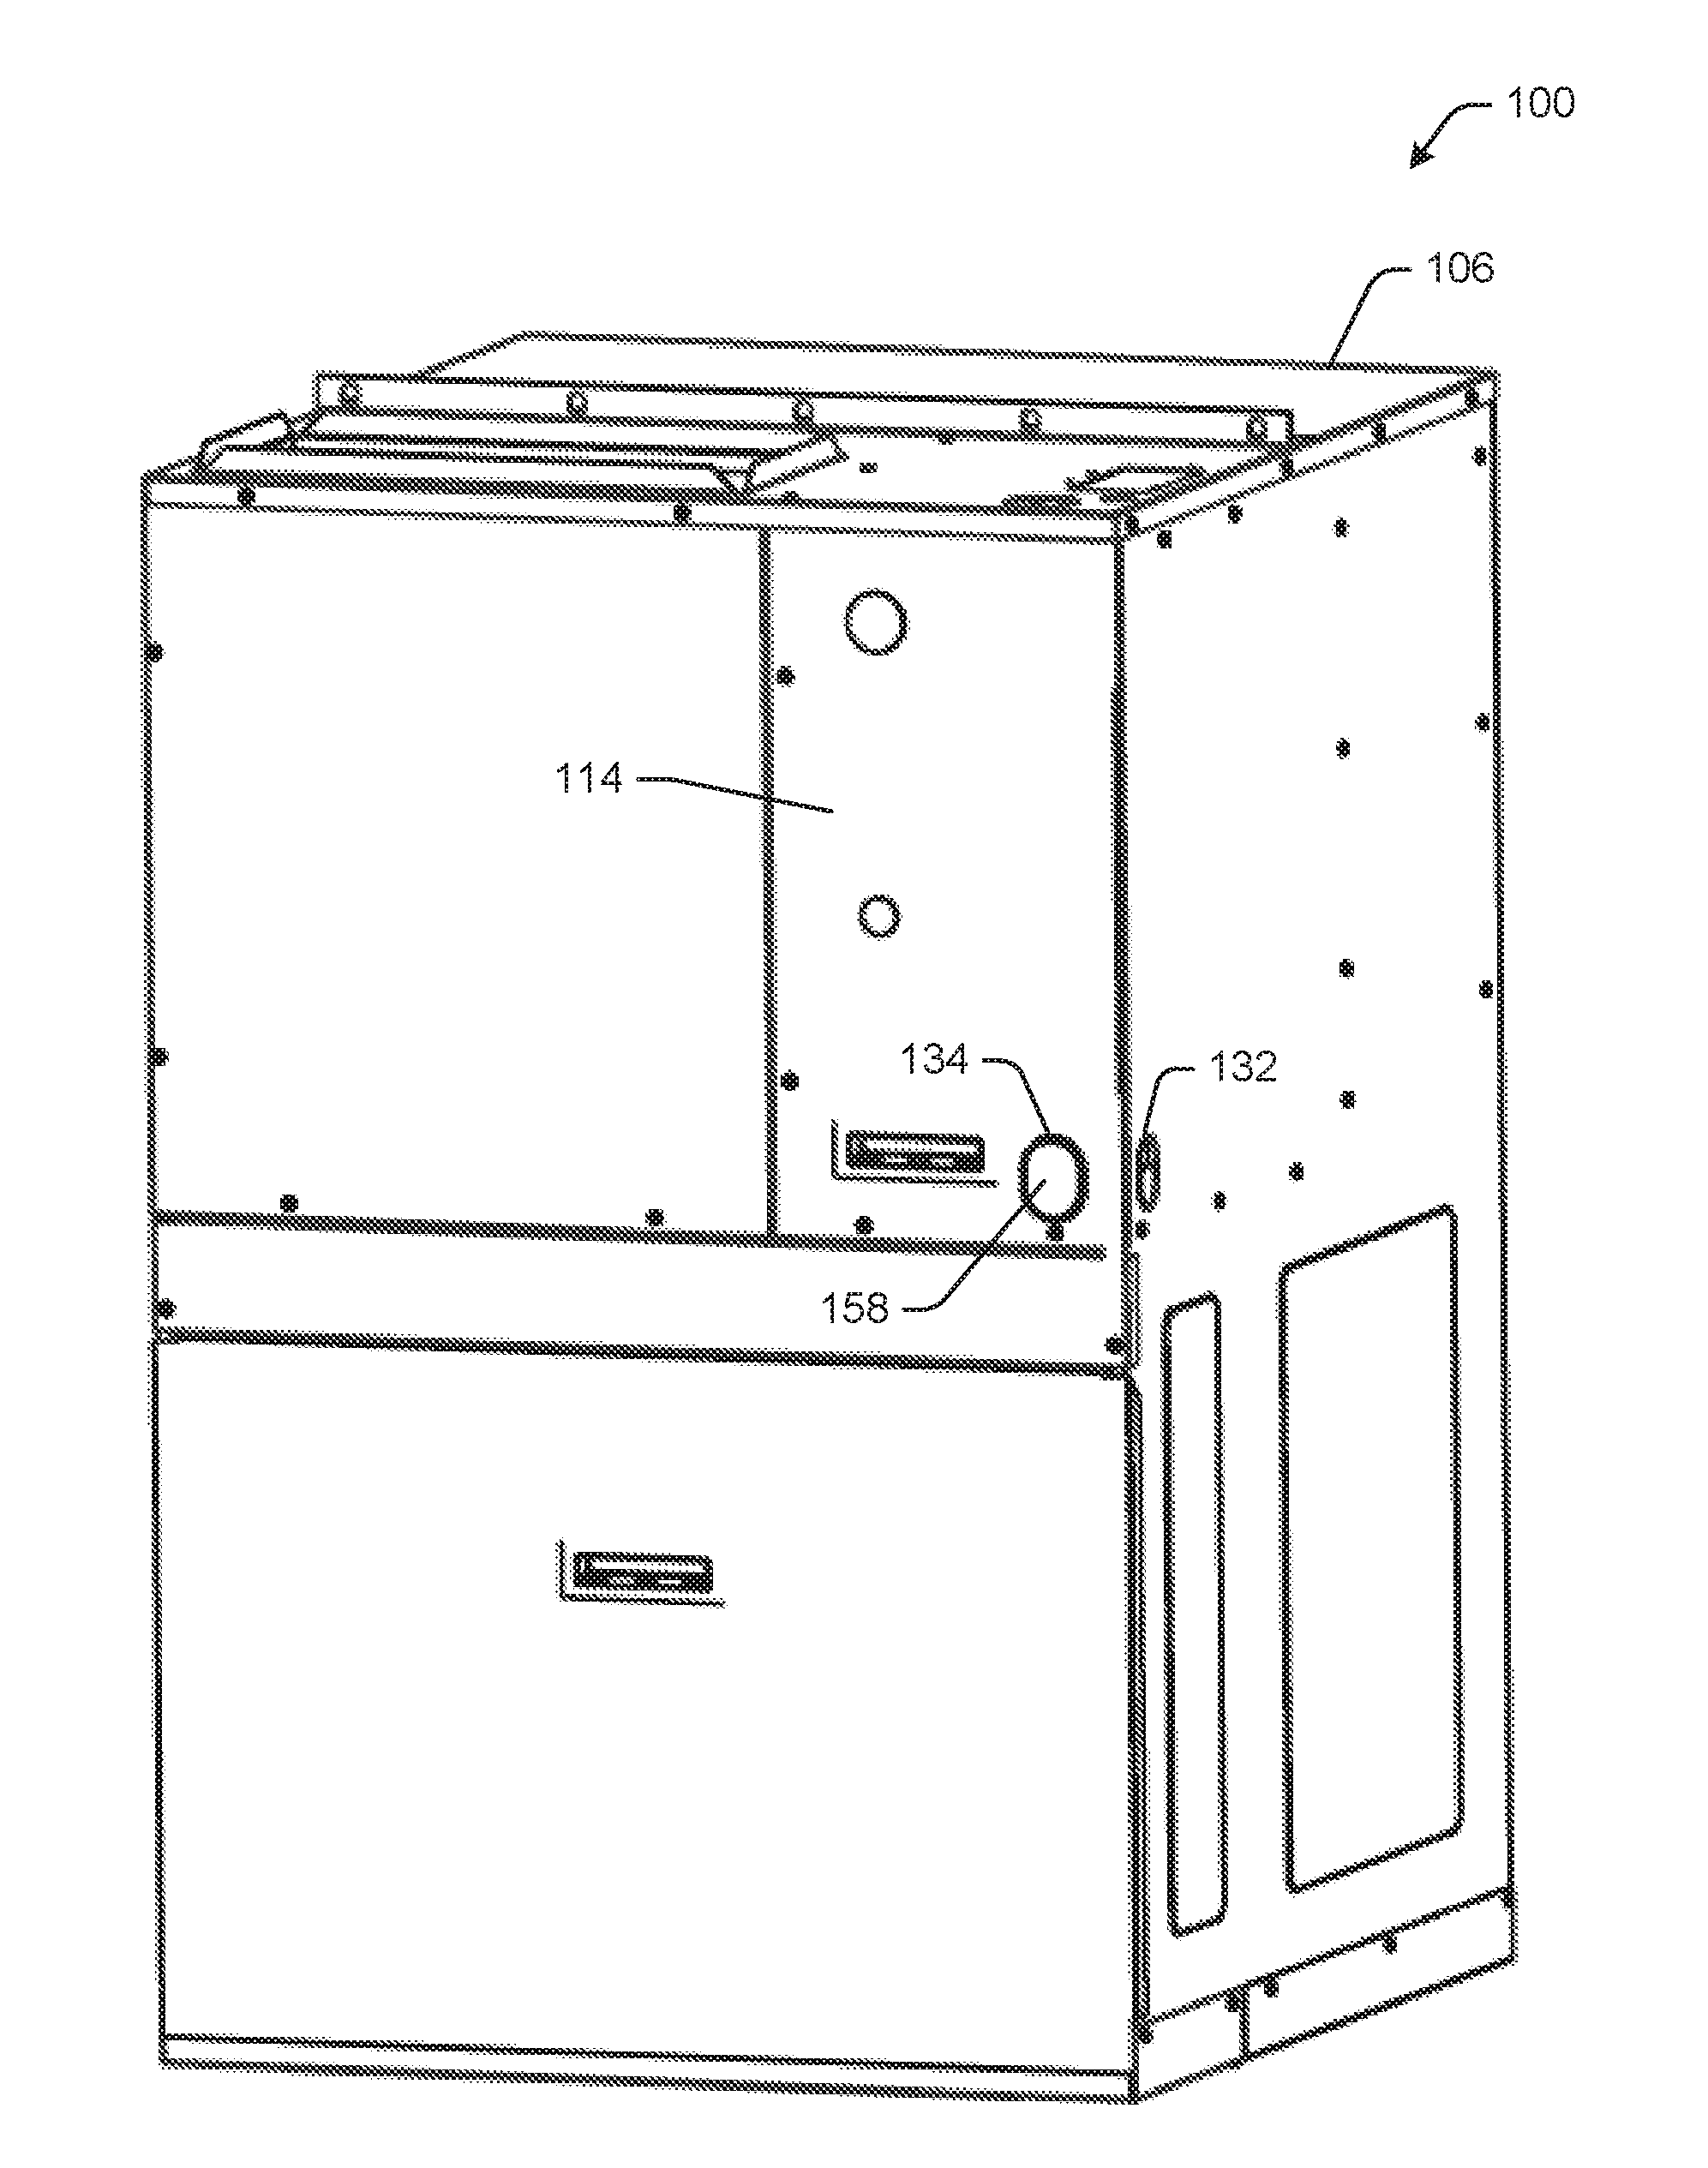 Systems and methods for a heating and cooling unit and components thereof